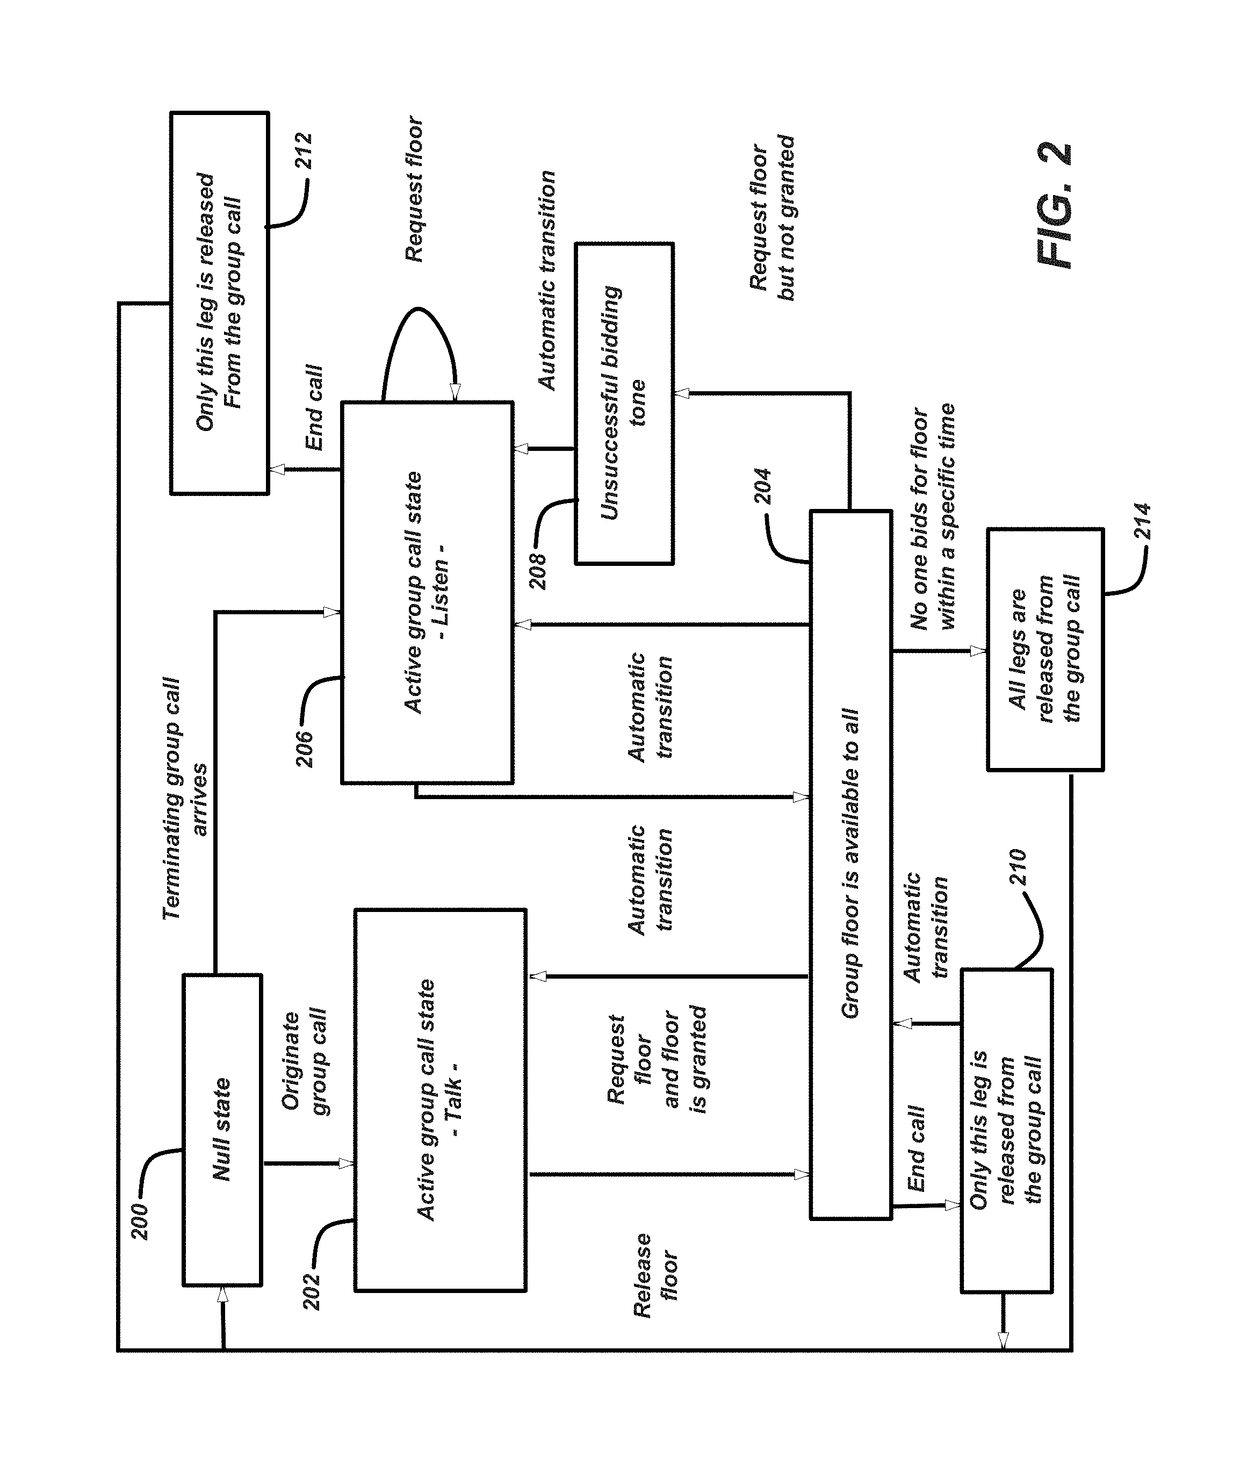 System and Method to Leverage Web Real-Time Communication for Implementing Push-to-Talk Solutions